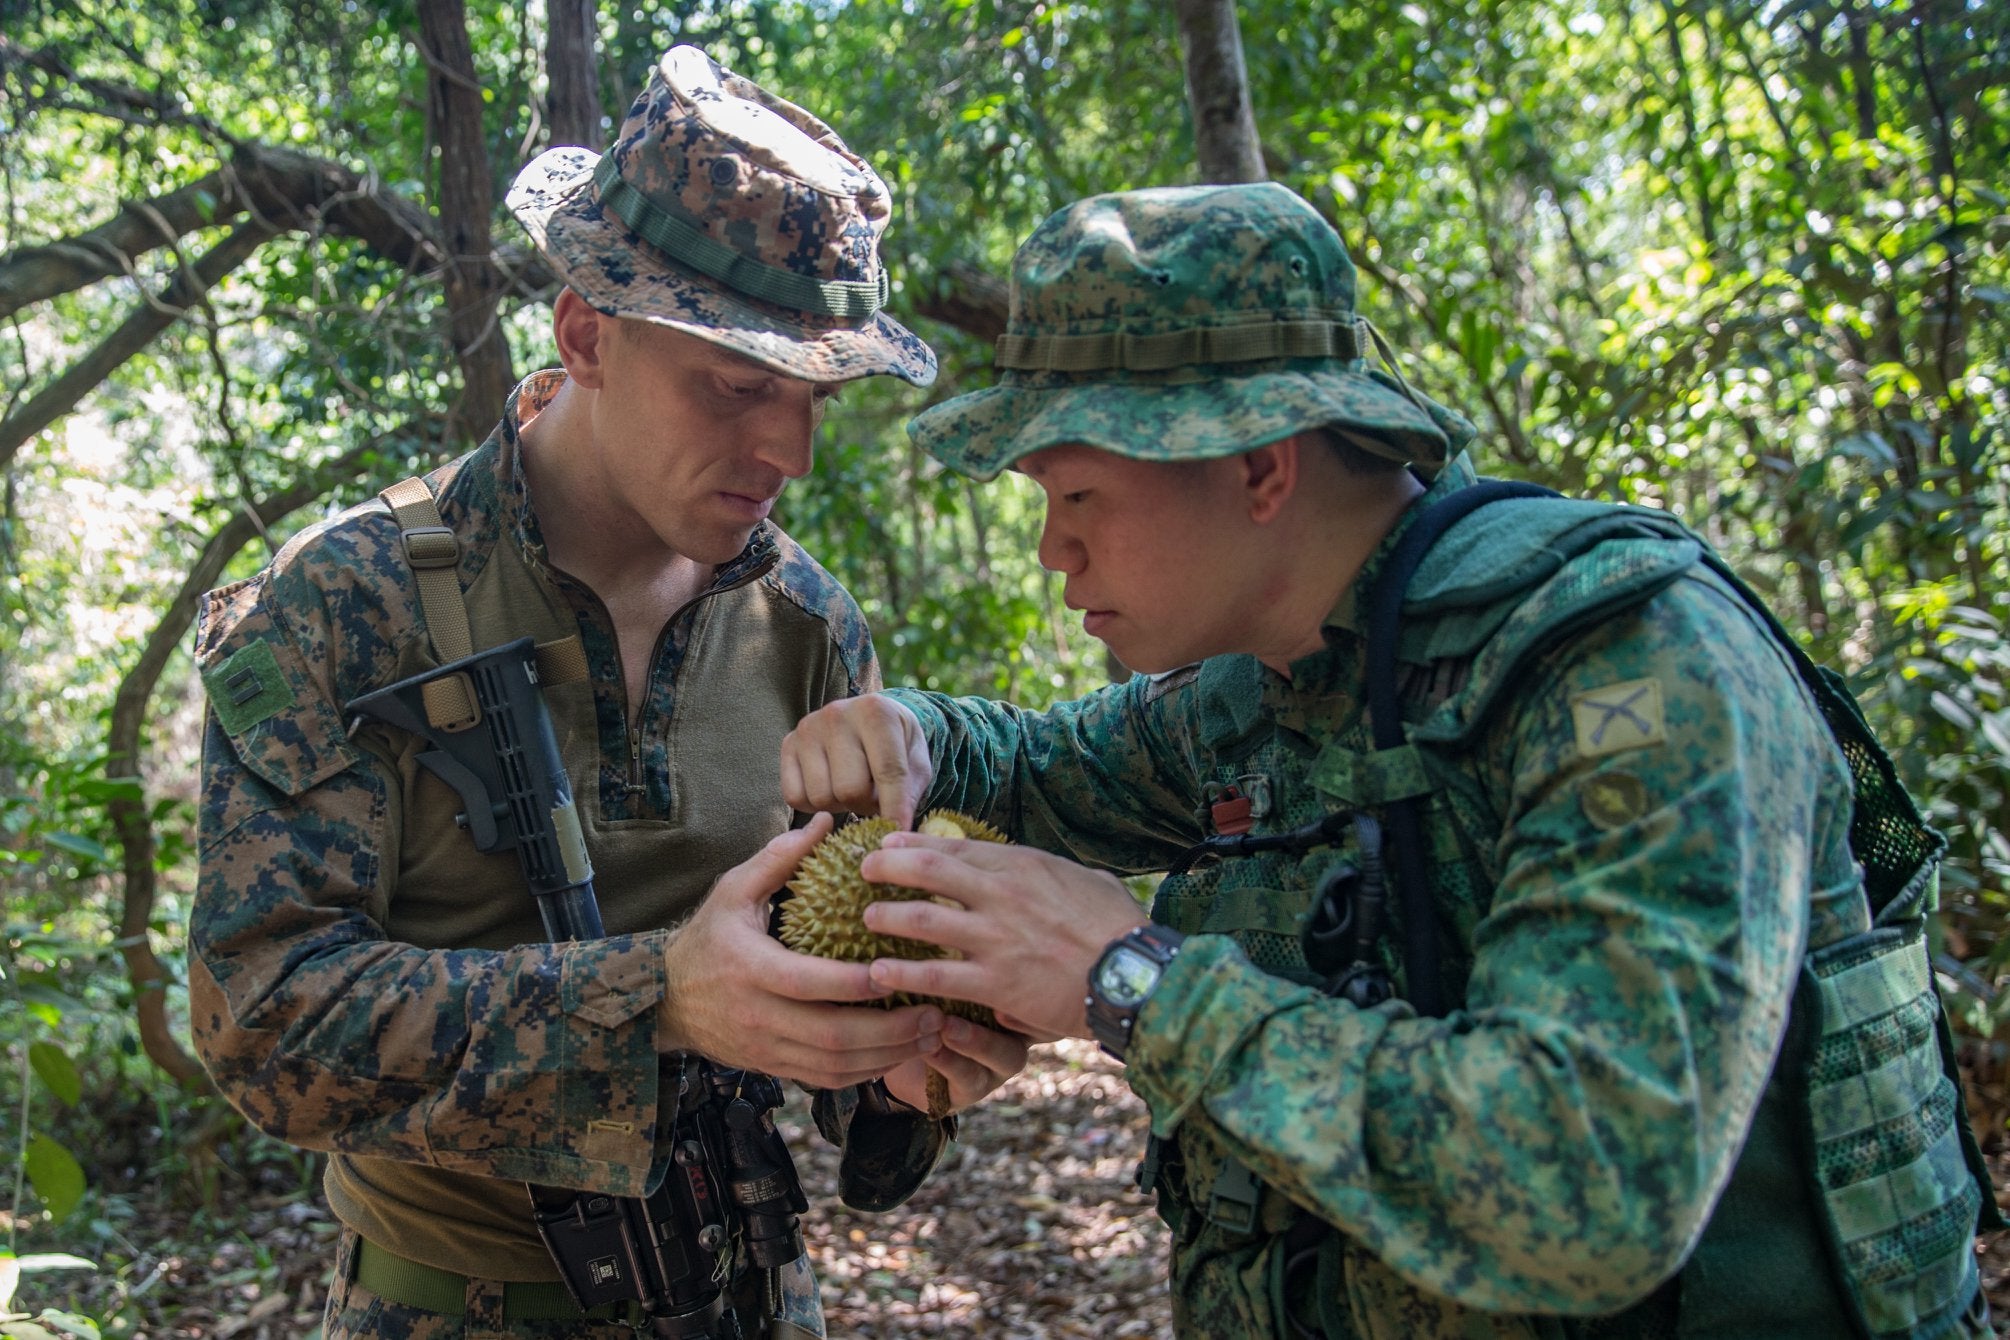 These Soldiers Were Given Durian to Eat As Part of 'Jungle Survival Techniques' - WORLD OF BUZZ